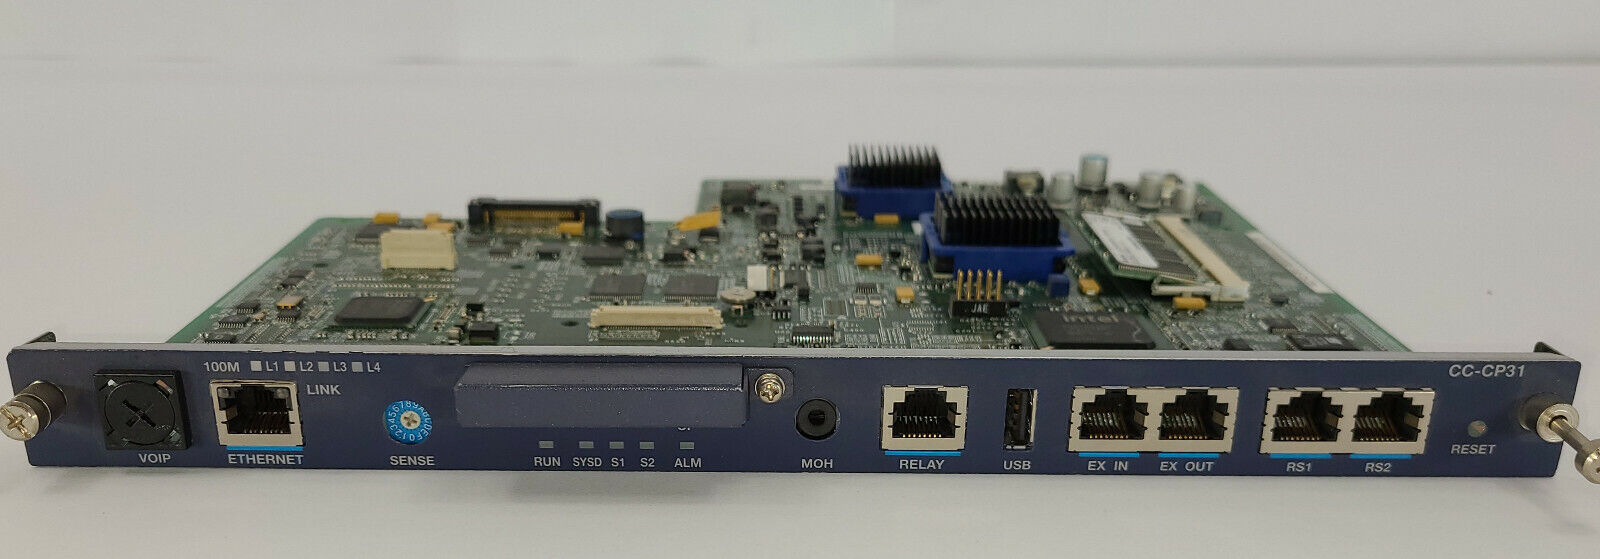 NEC CC-CP31 CARD CONTROLLER MODELE BOARD FOR UNIVERGE SV8300 PHONE SYSTEM CCCP31